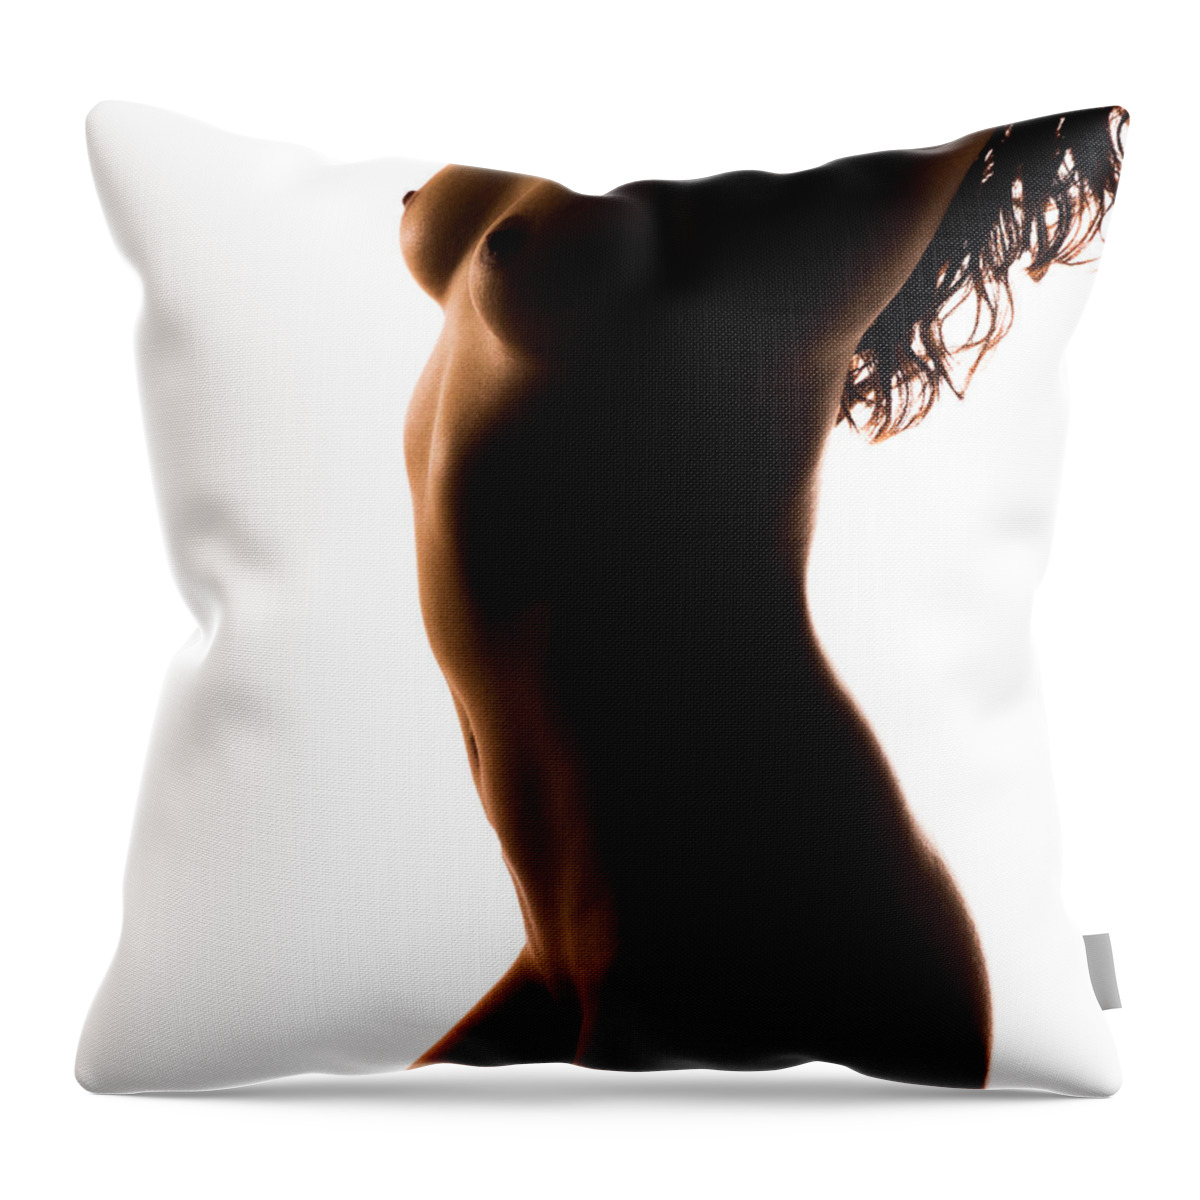 Silhouette Throw Pillow featuring the photograph Bodyscape 185 by Michael Fryd